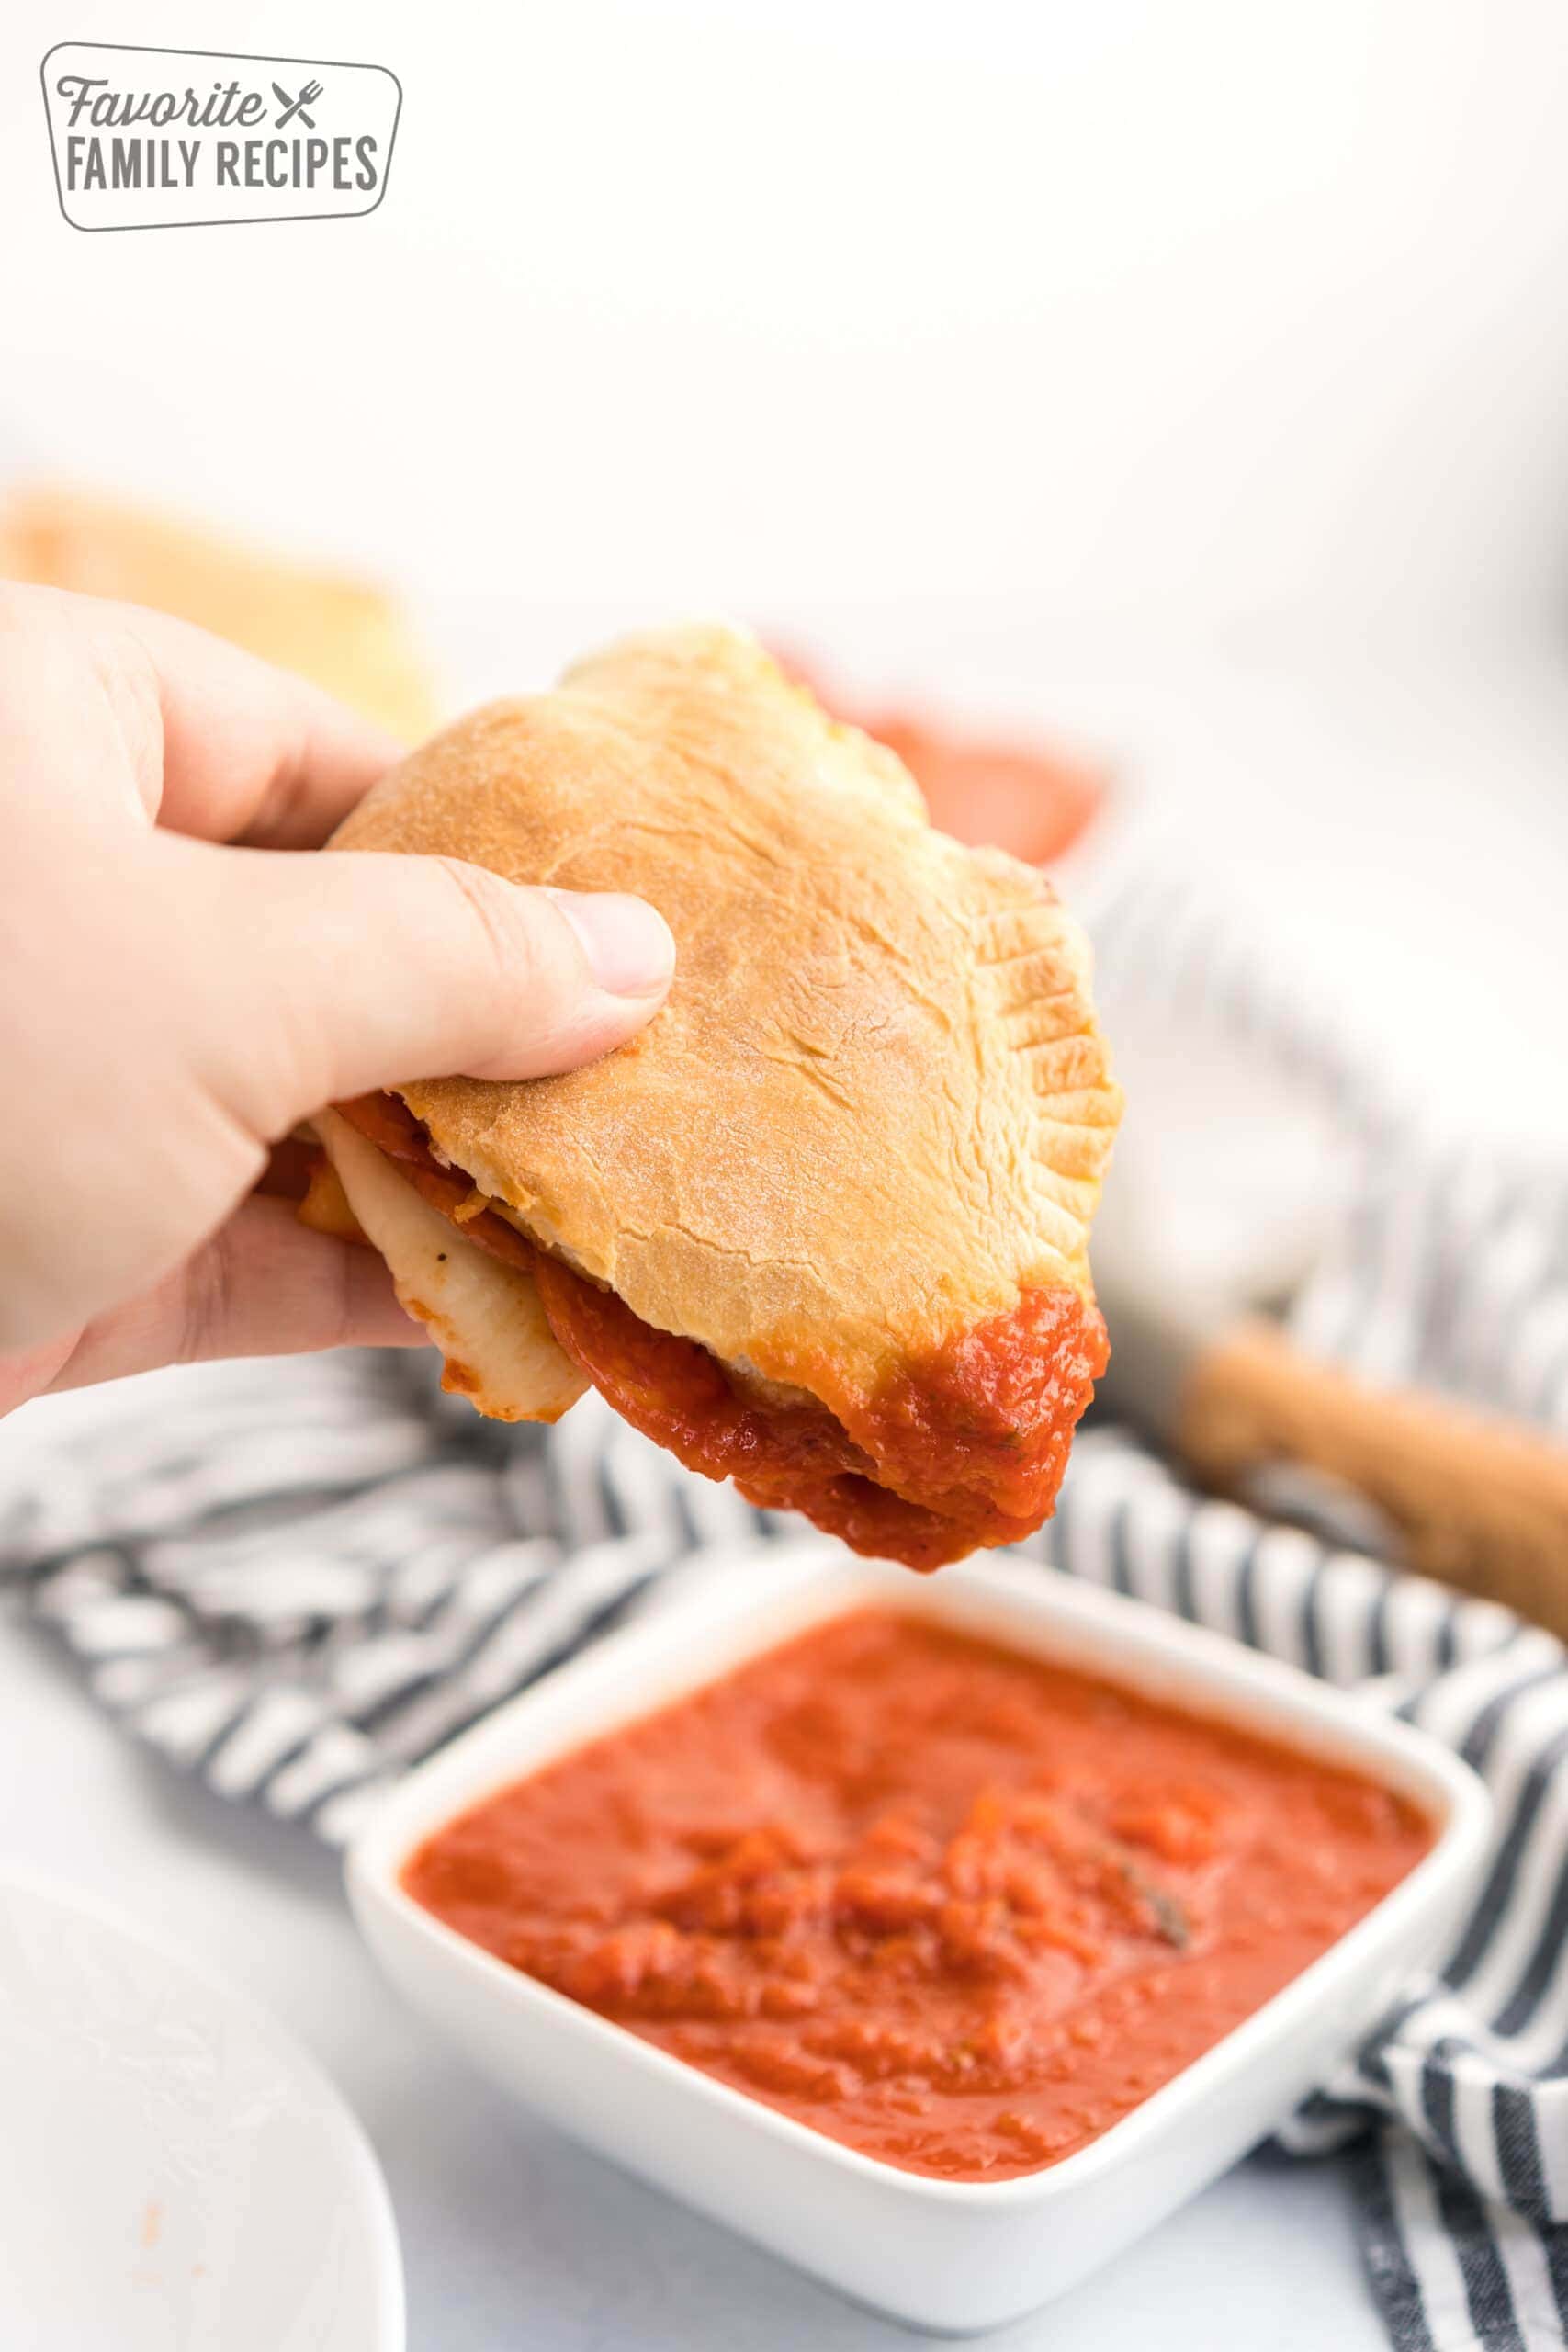 A calzone being dipped in marinara sauce